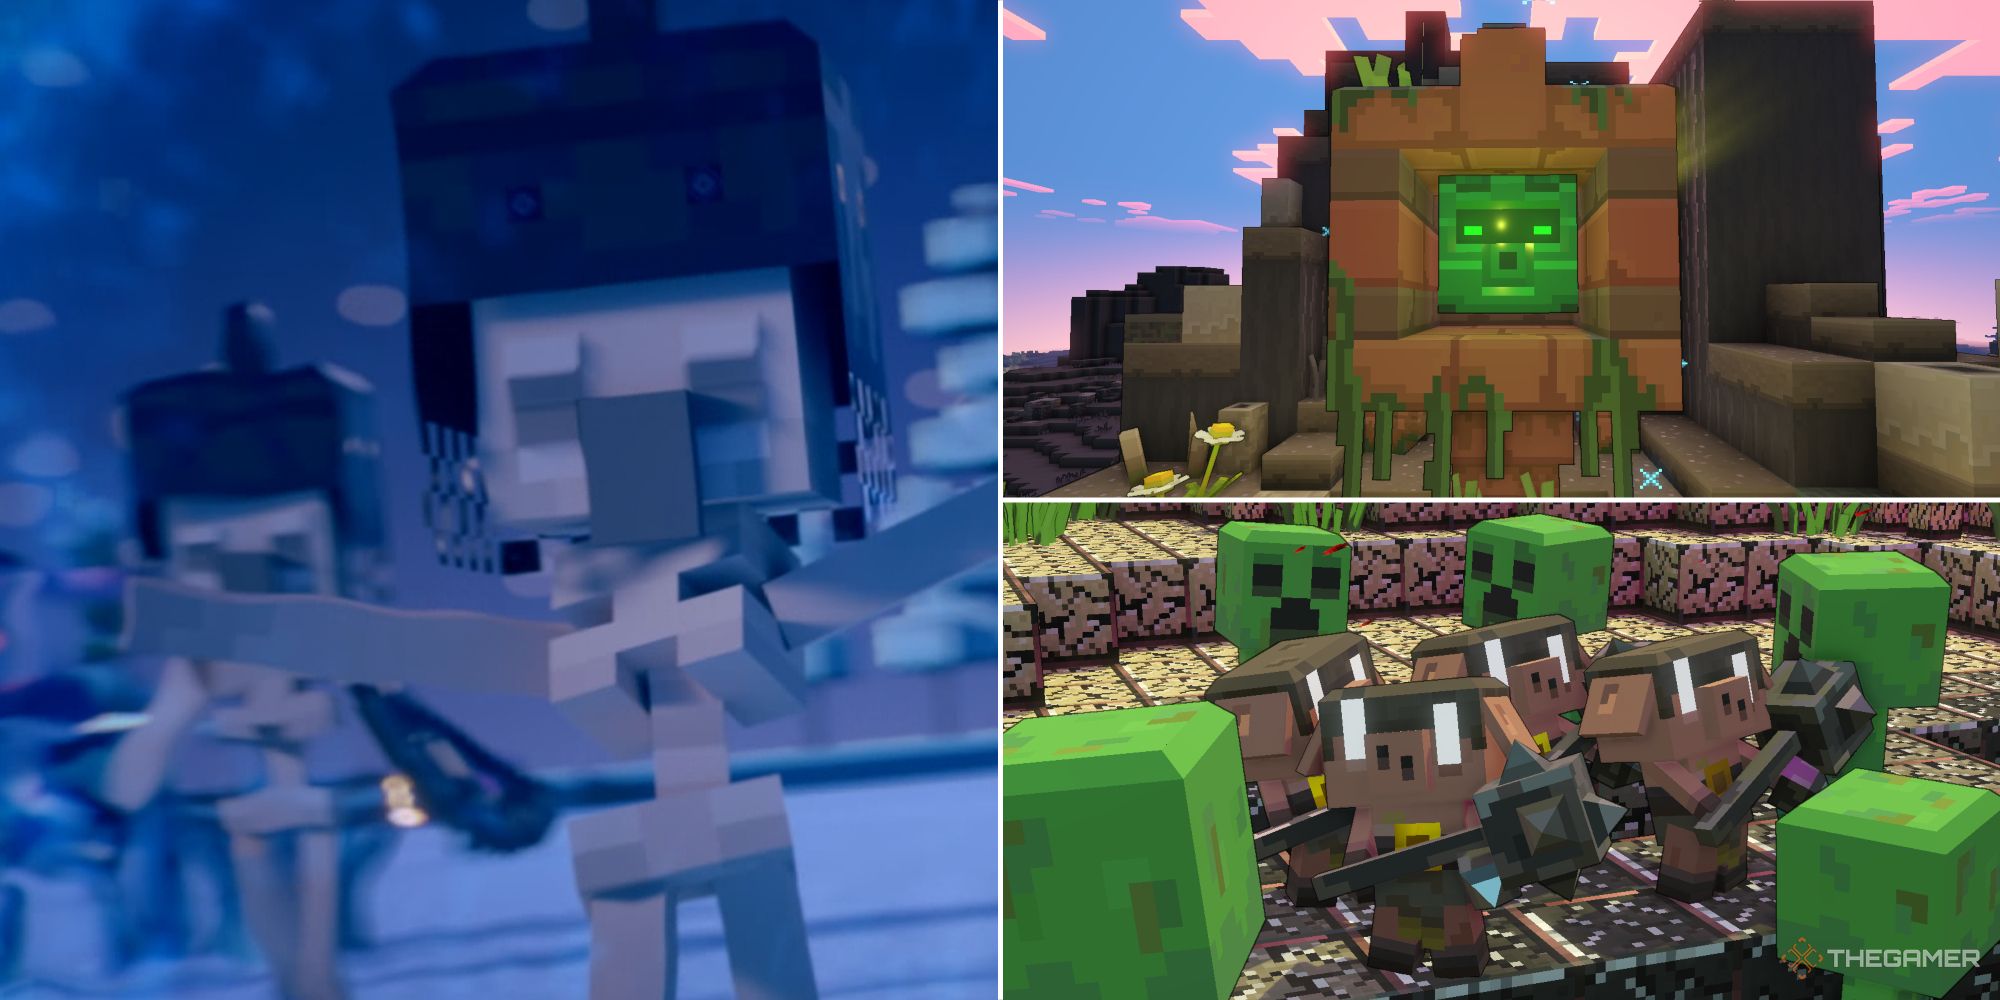 All Firsts in Minecraft Legends: Locations, how to wake up & revival cost -  Charlie INTEL